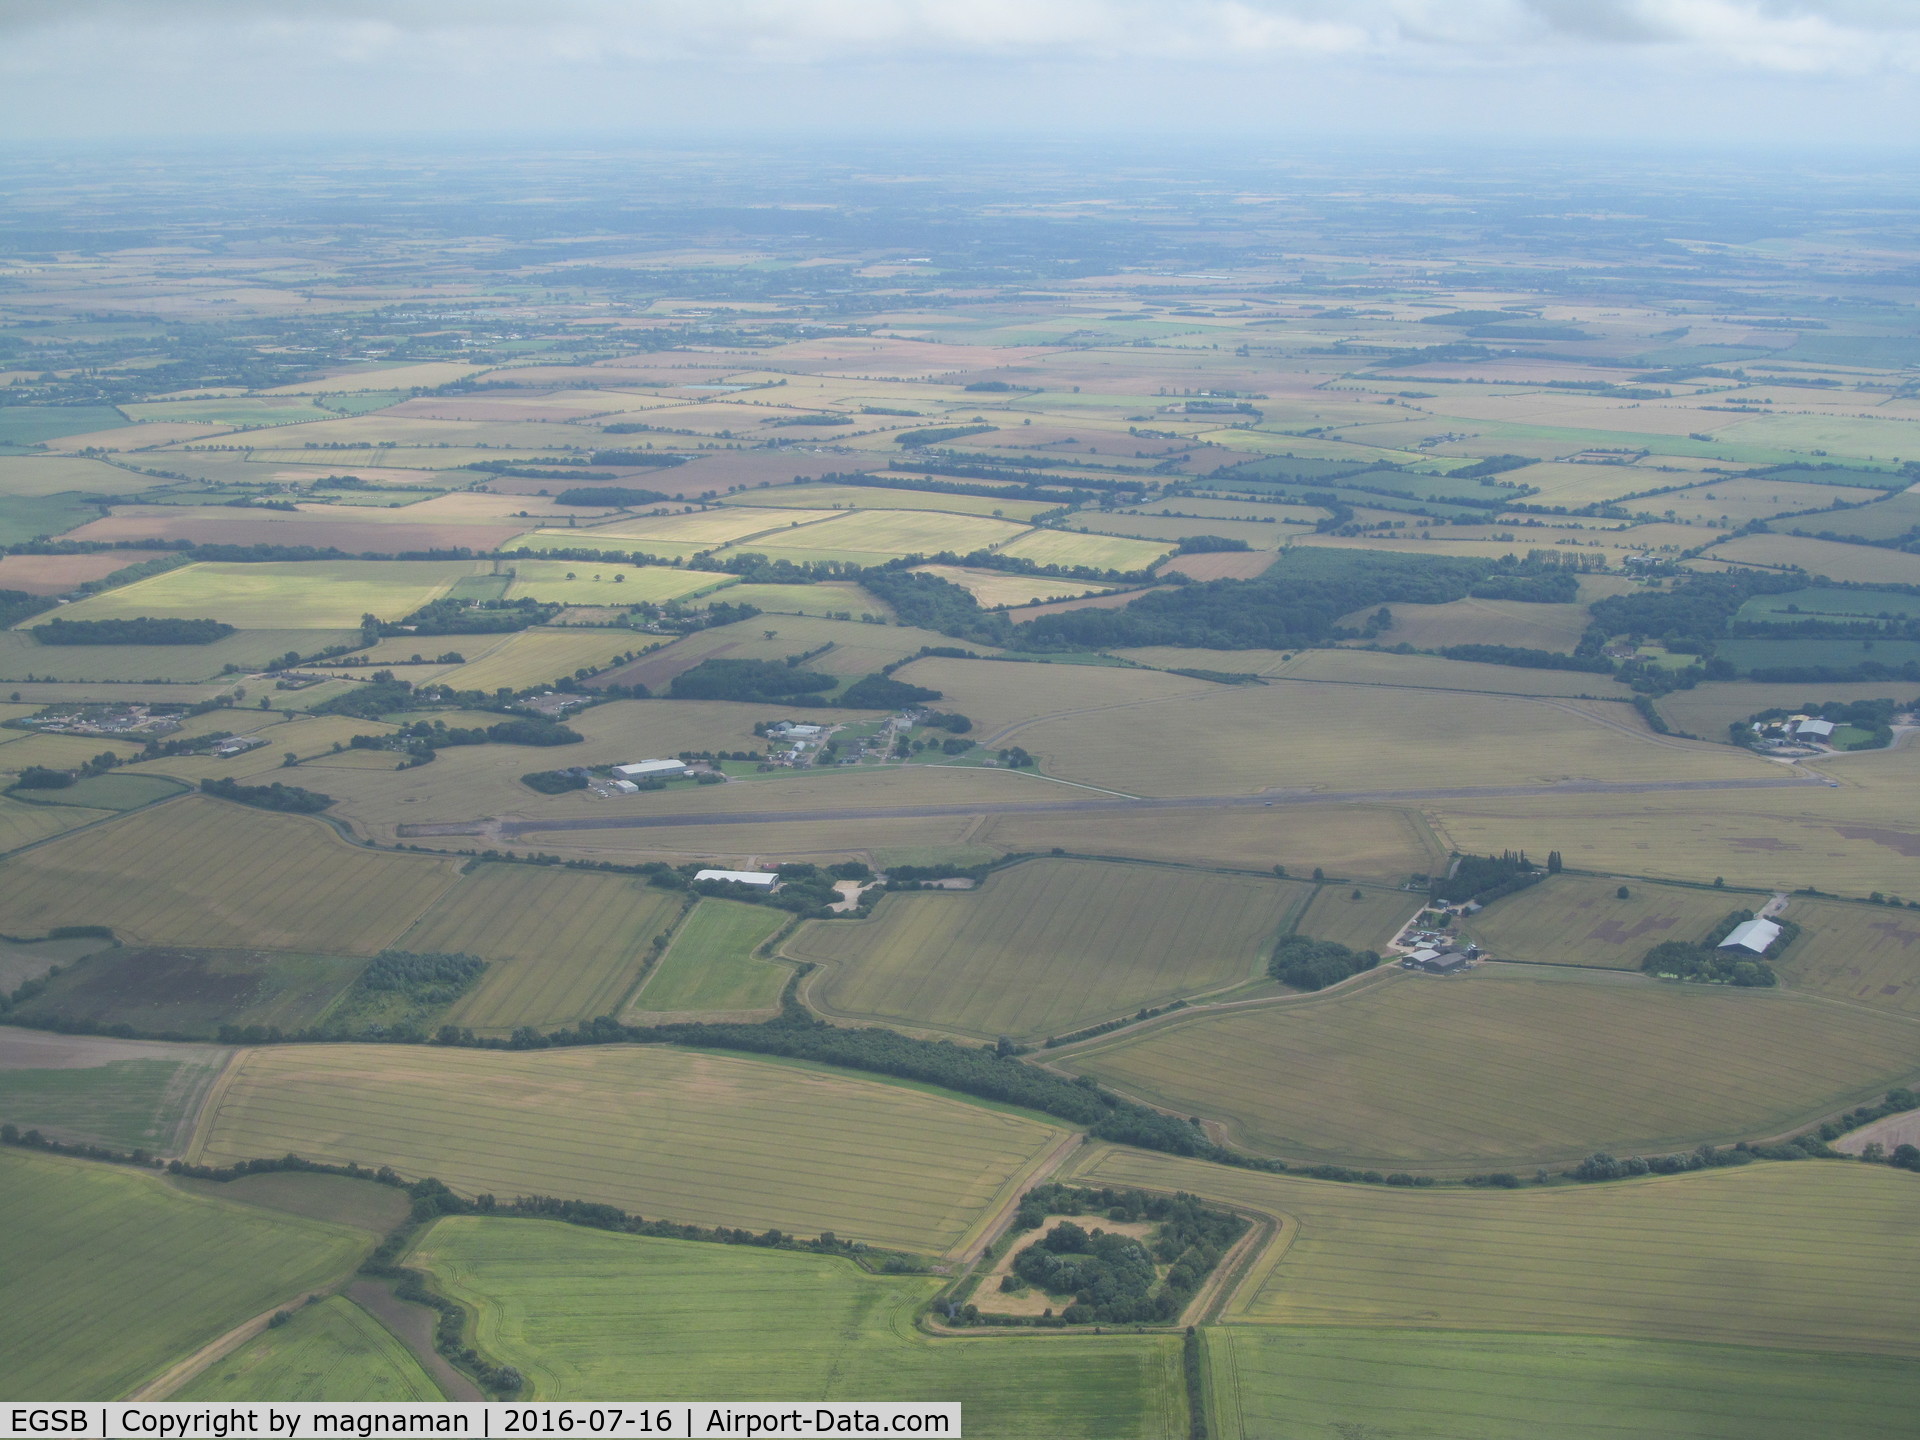 Bedford Castle Mill Airport, Bedford, England United Kingdom (EGSB) - Actually Little Staughton strip - a couple of miles east of Bedford